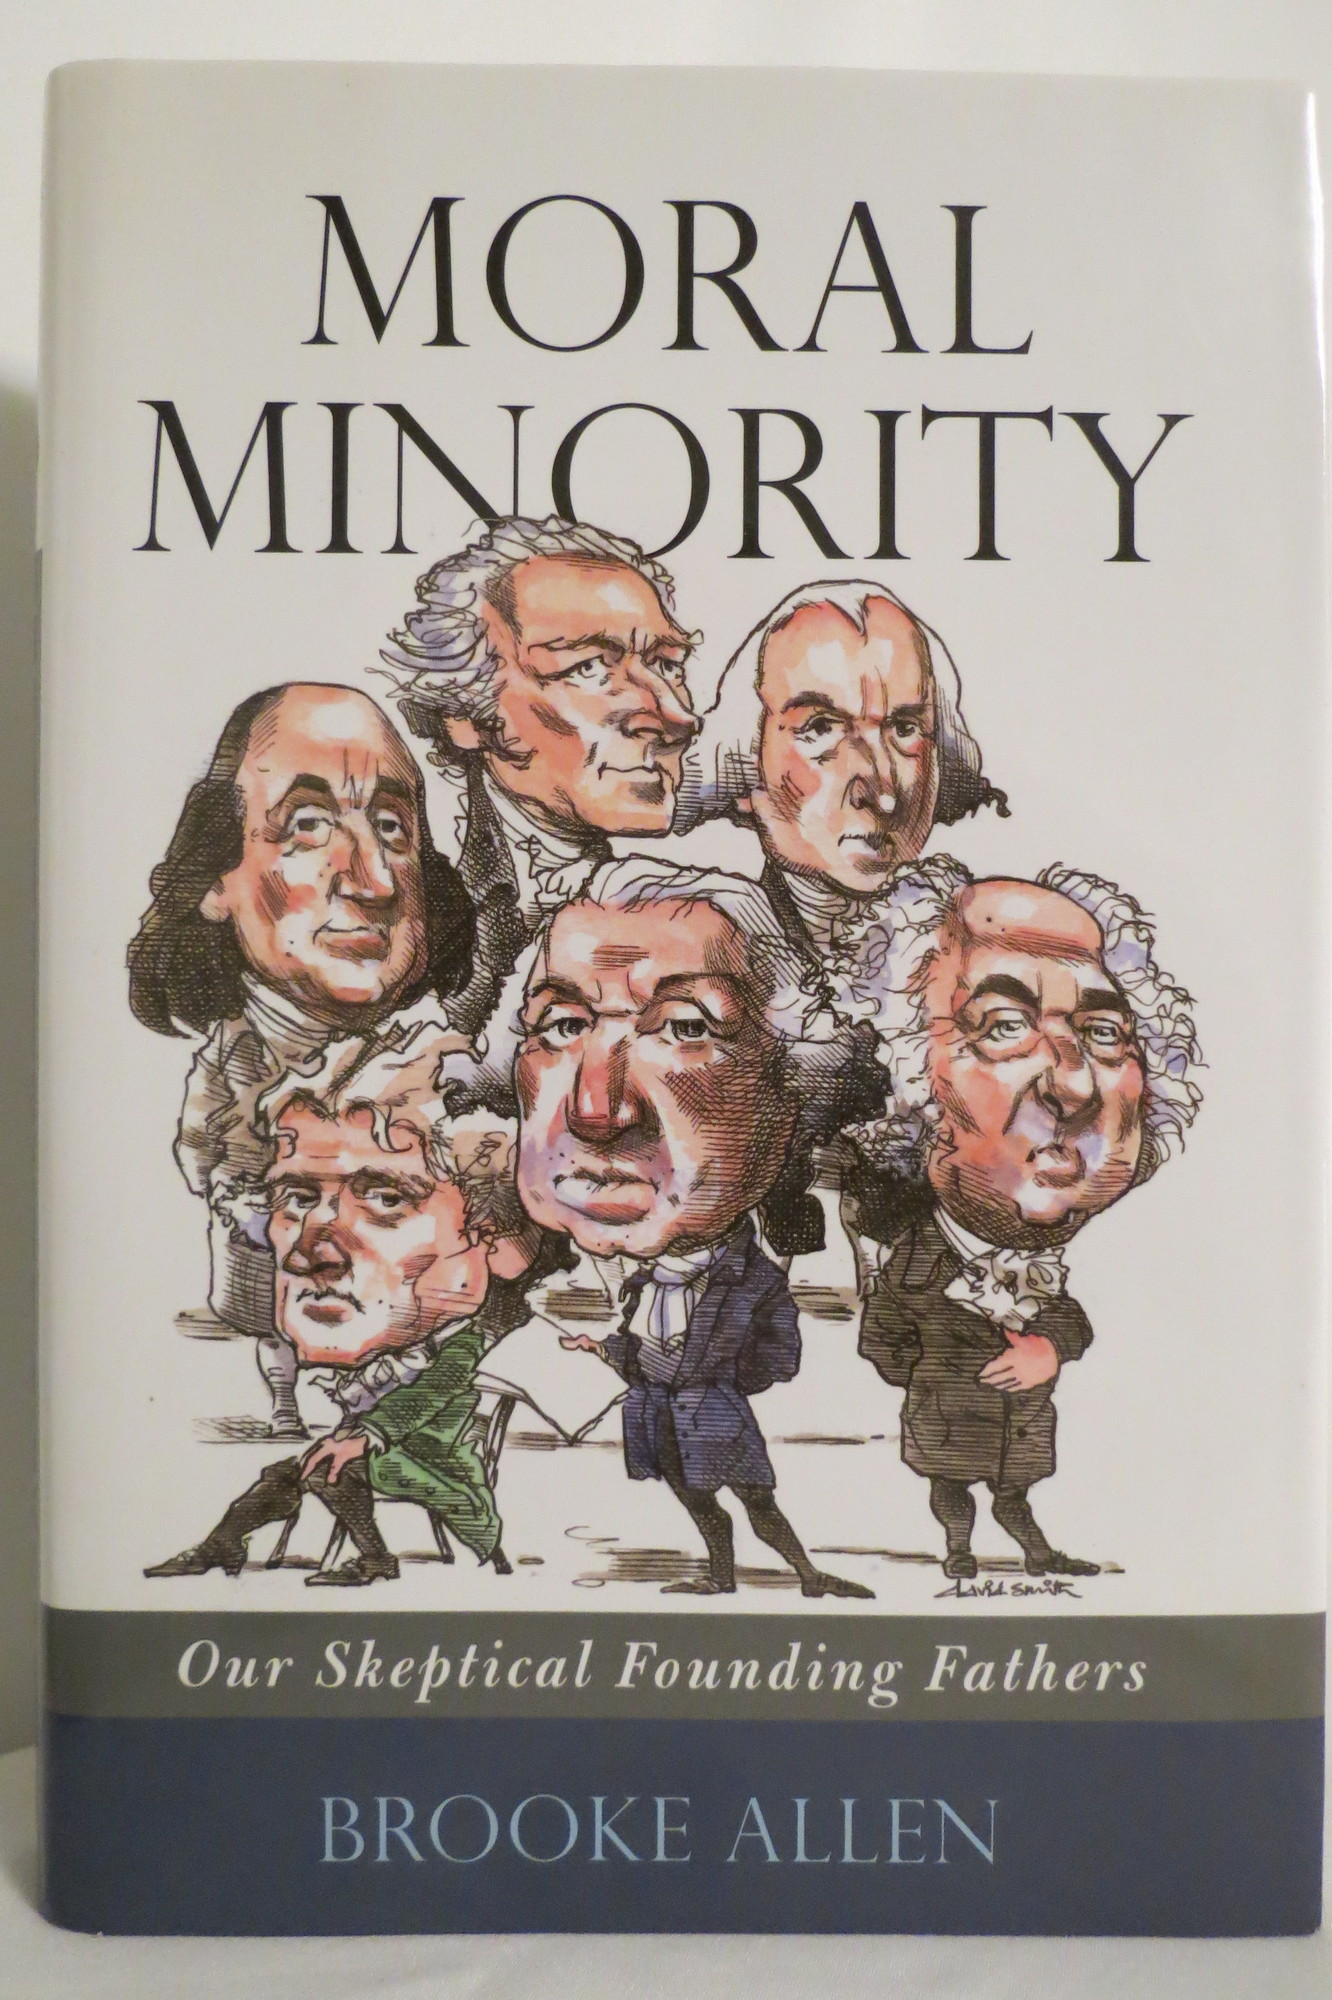 Image for MORAL MINORITY Our Skeptical Founding Fathers (DJ protected by a clear, acid-free mylar cover)